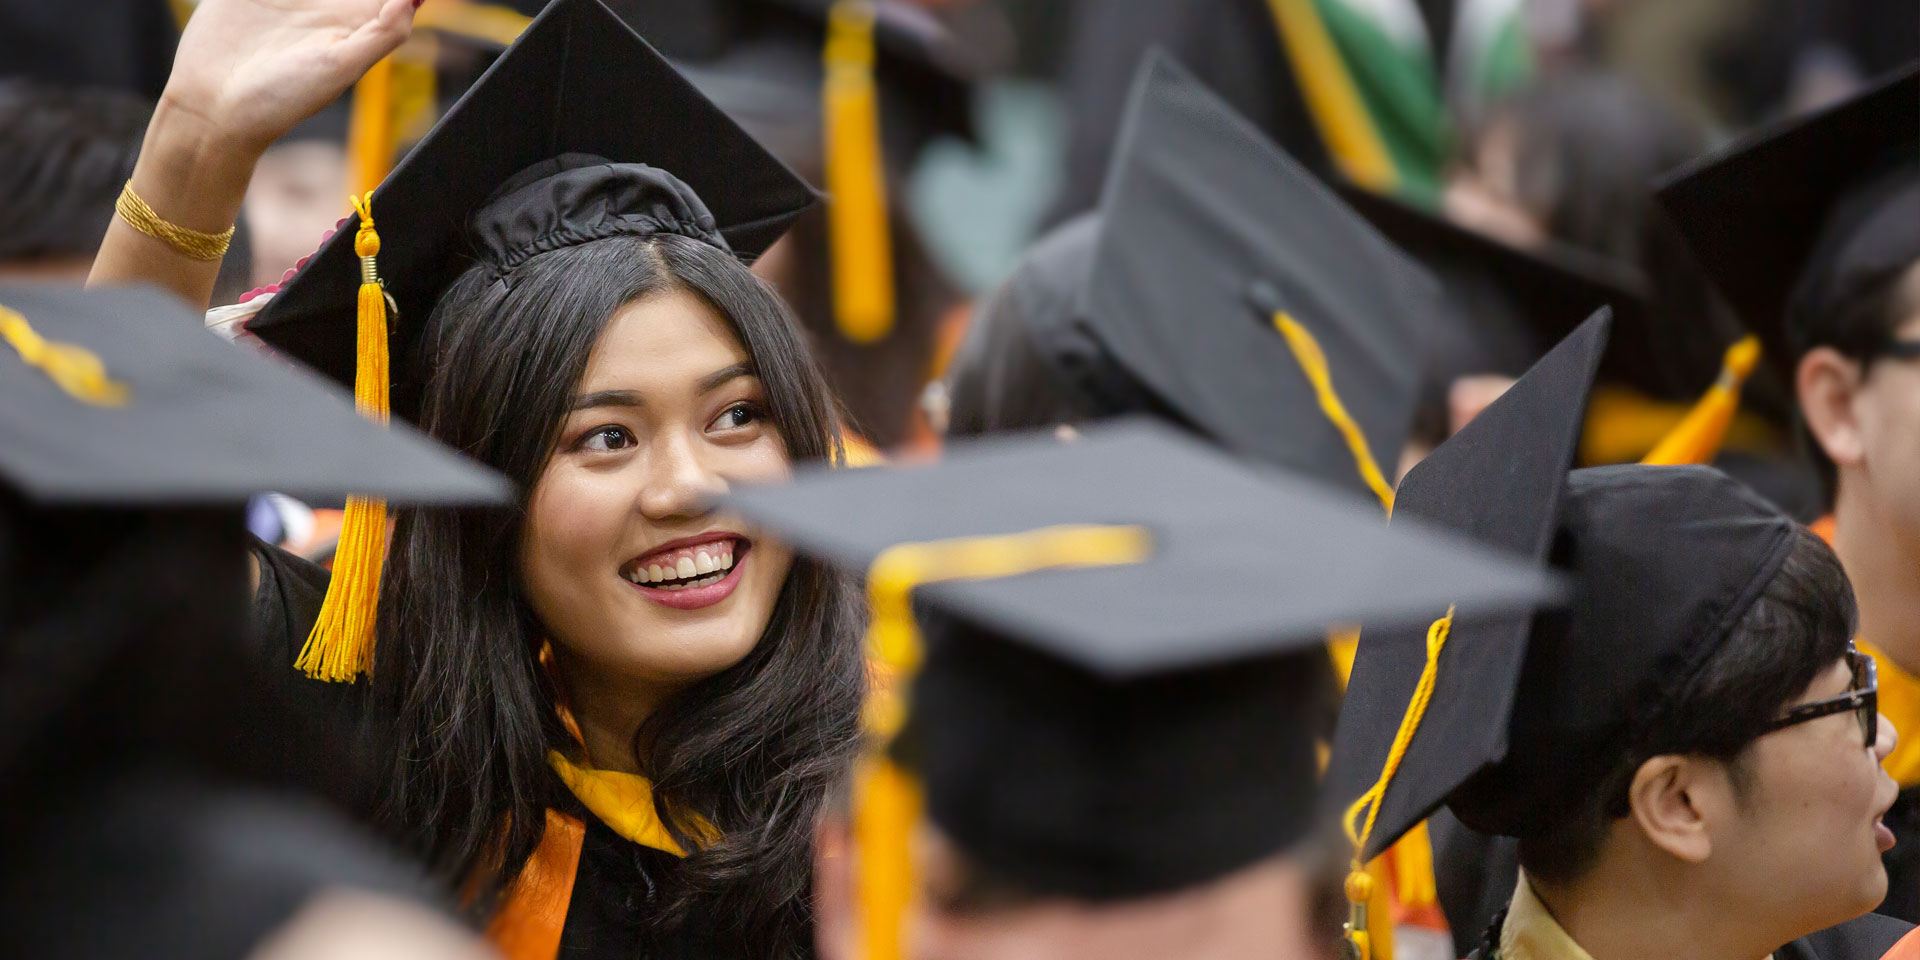 Master of Science in accounting student Meichen Lin waves to friends in the crowd during one of three fall commencement ceremonies for the Naveen Jindal School of Management.